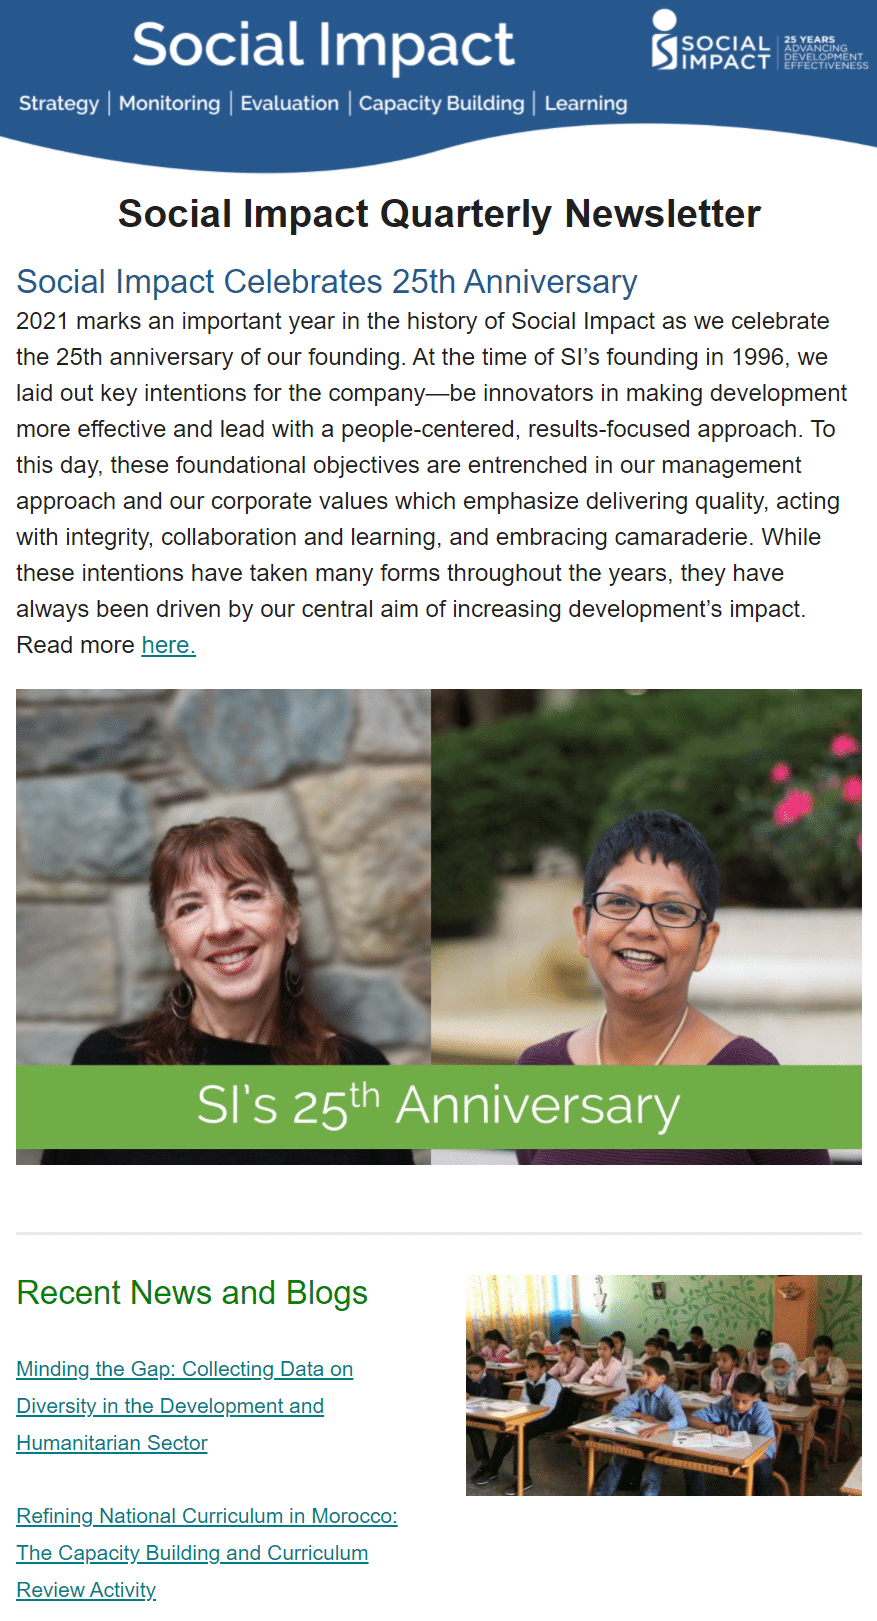 Social Impact Quarterly Newsletter featuring the S.I. Celebrates 25th Anniversary blog.